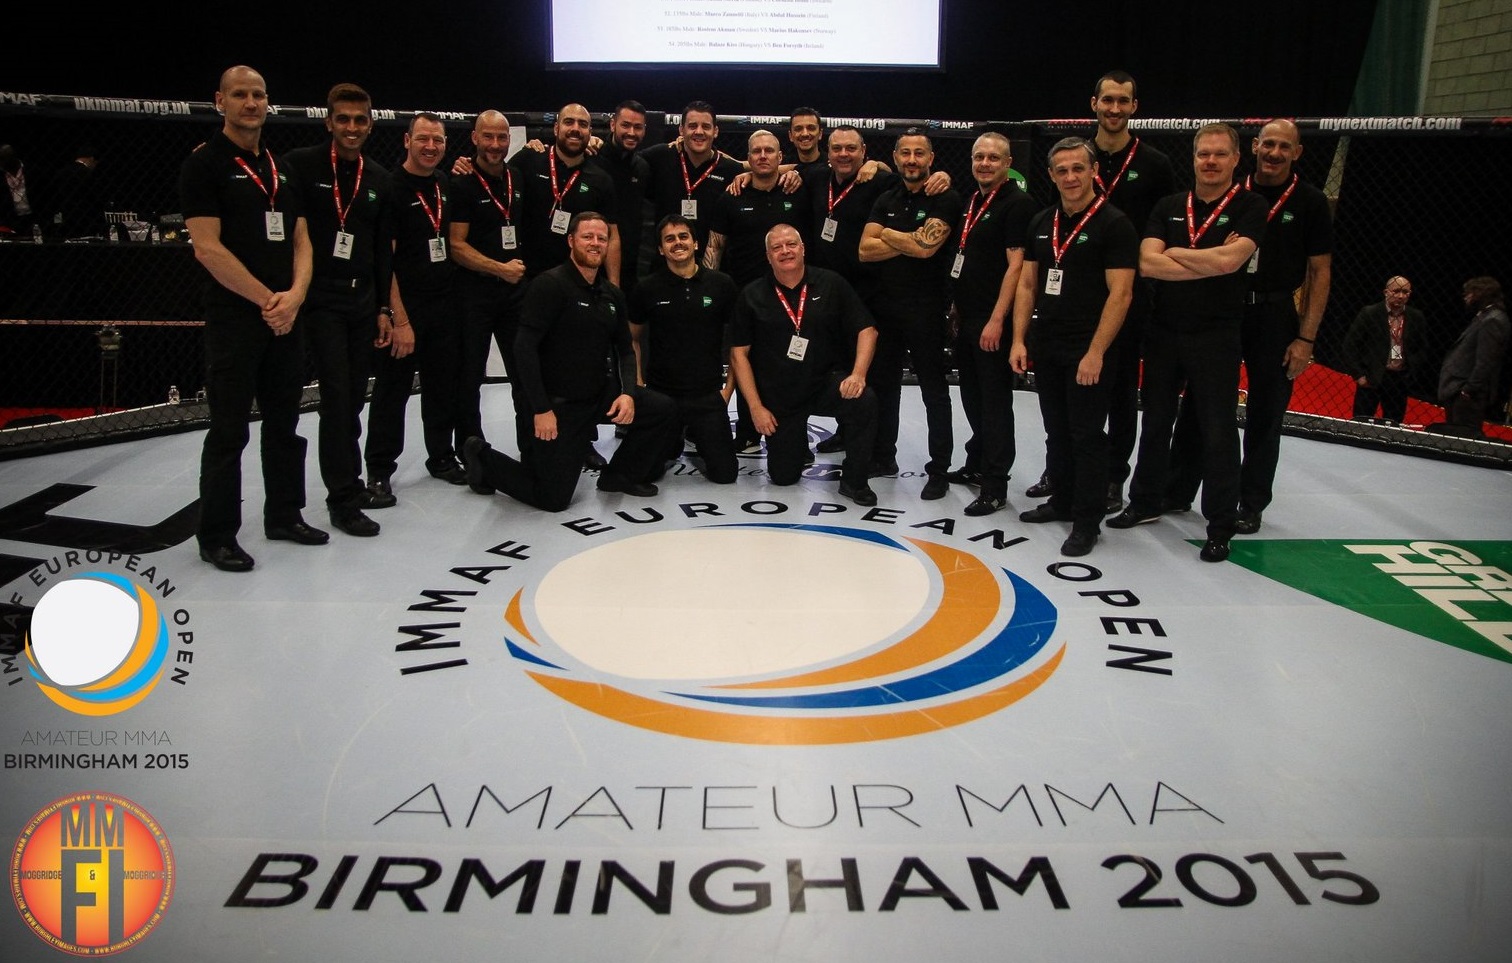 Marc Goddard to lead IMMAF International Officials Certification Course in Northern Ireland